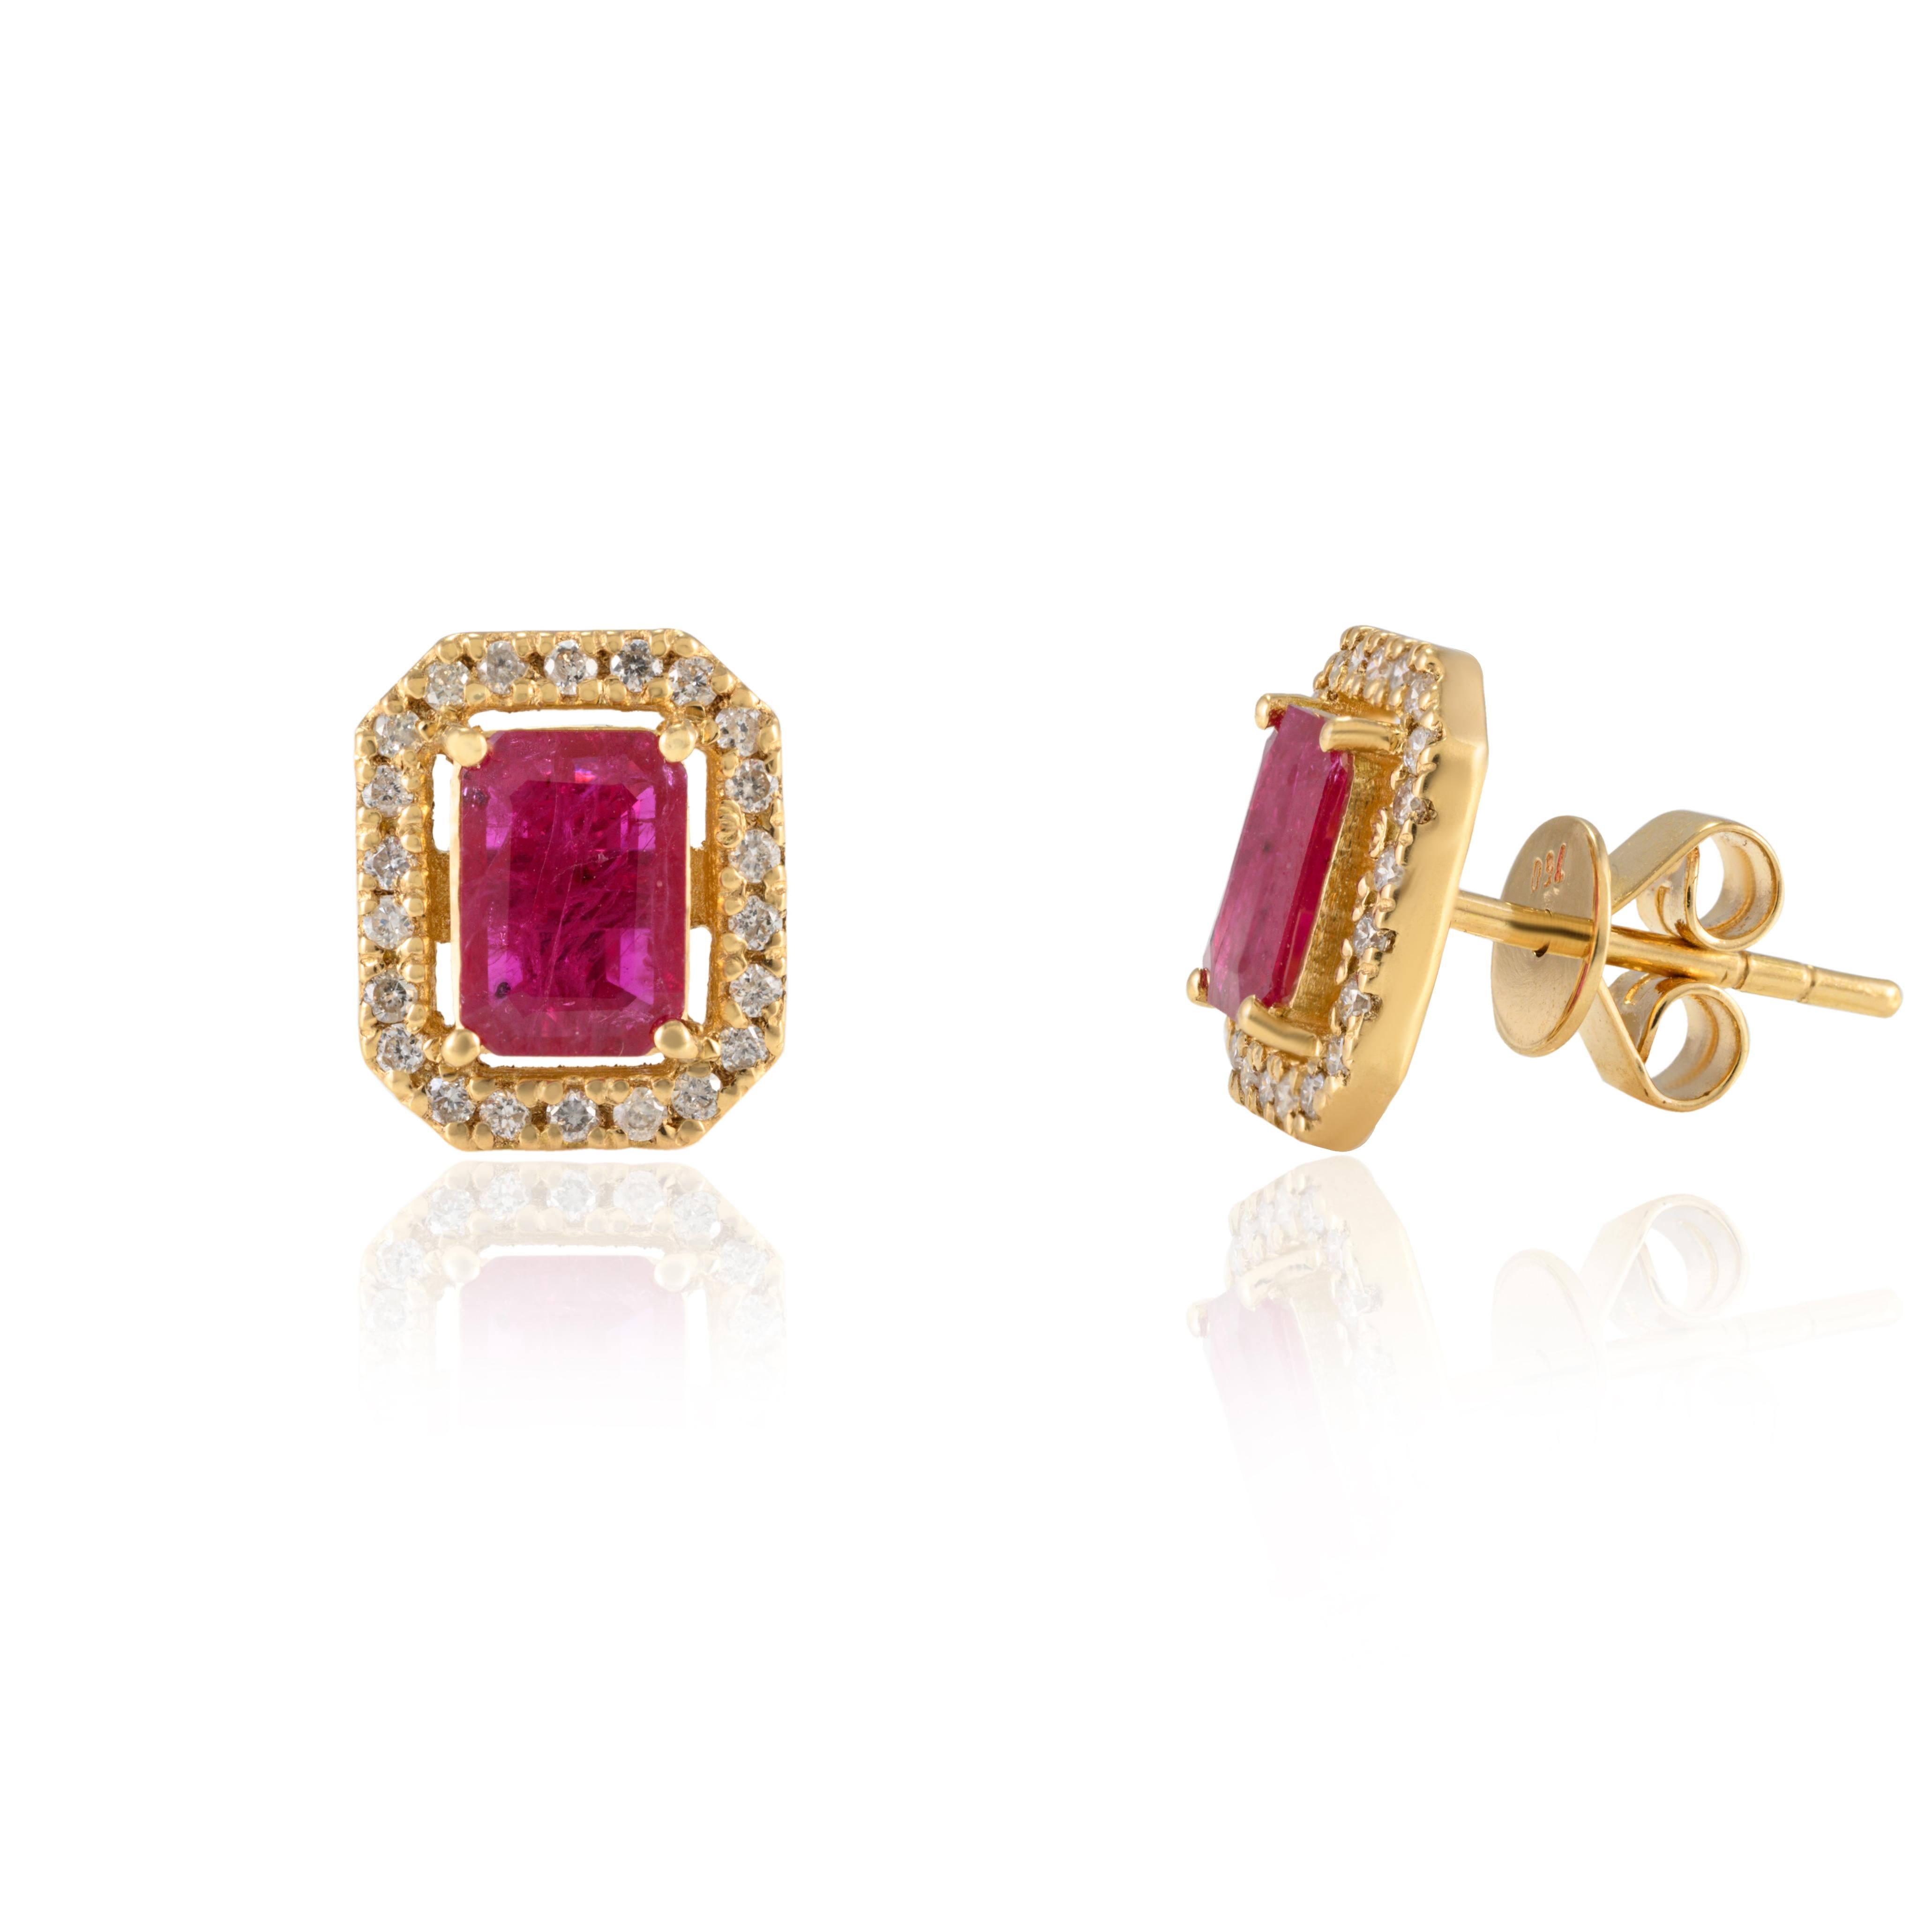 Ruby Halo Diamond Stud Earrings in 18k Solid Yellow Gold Gift For Her In New Condition For Sale In Houston, TX